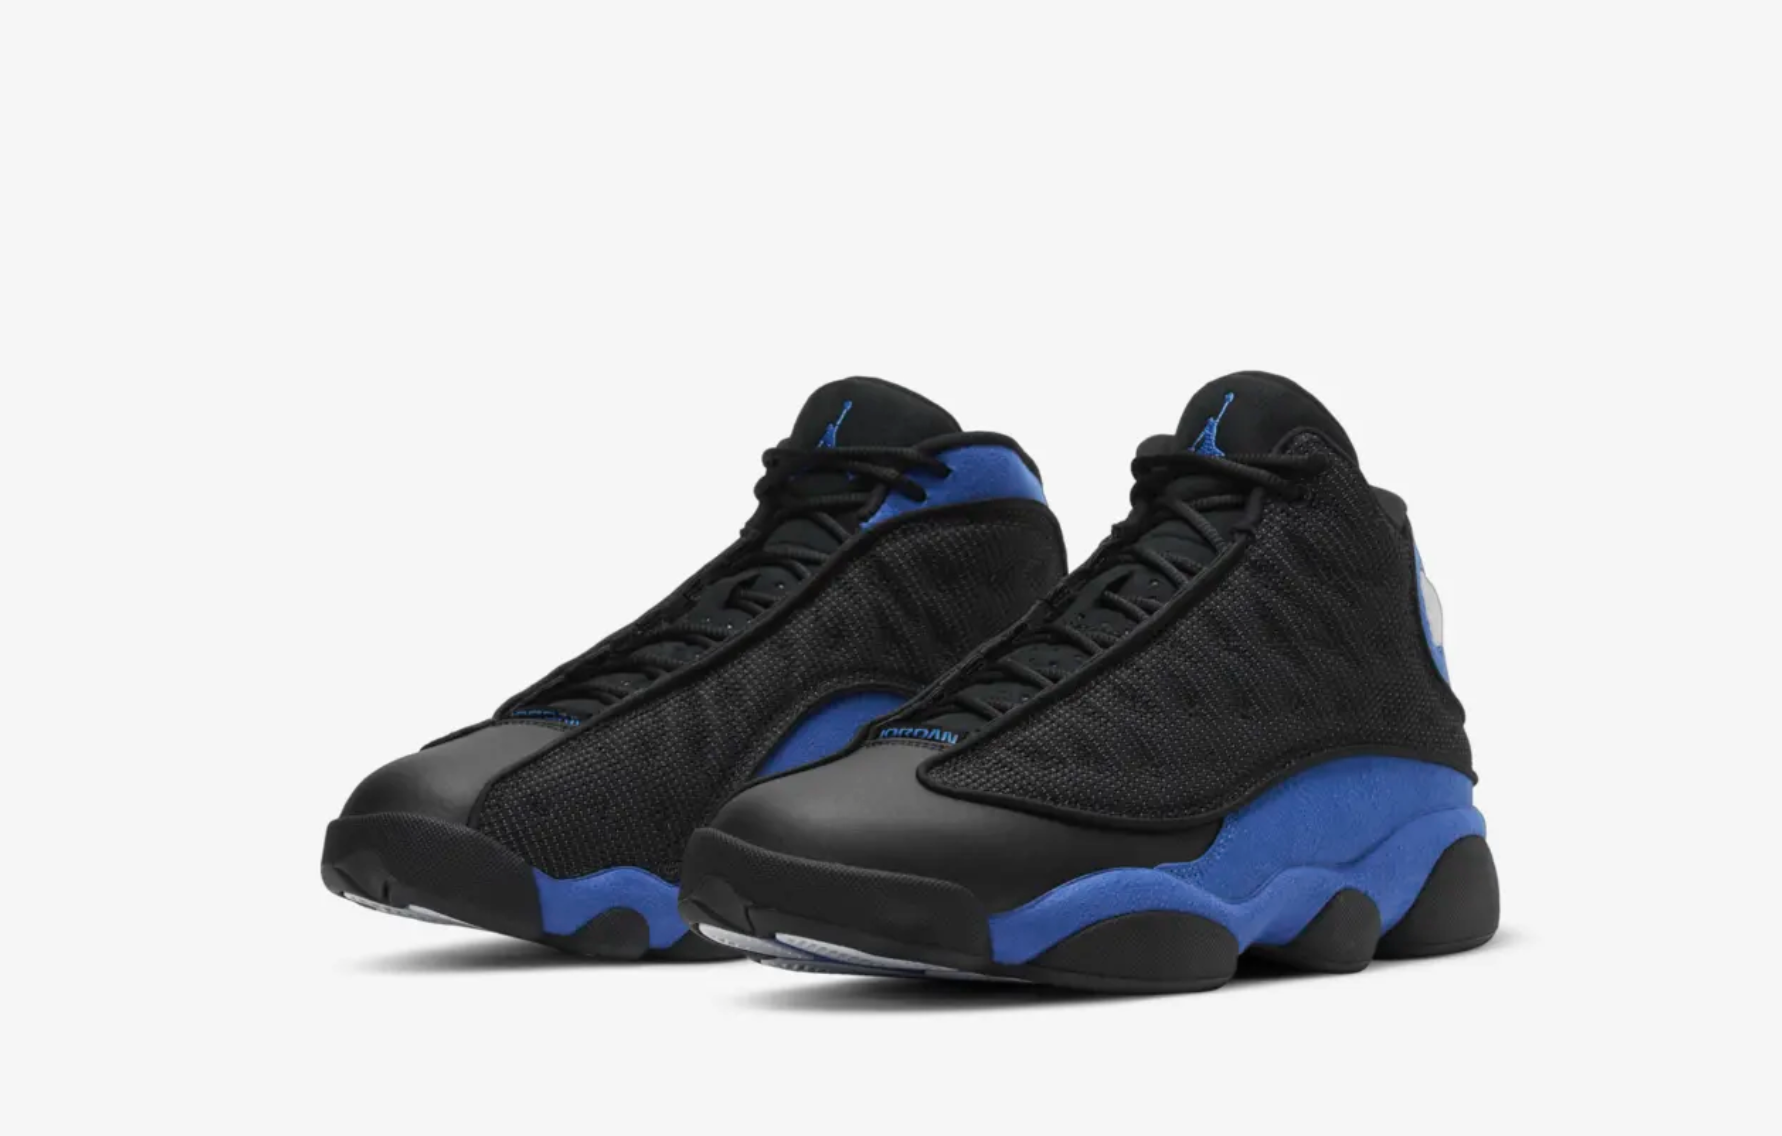 Air Jordan 13 Retro More Featured In Latest 12 Days Of Greatness Drops Cassius Born Unapologetic News Style Culture